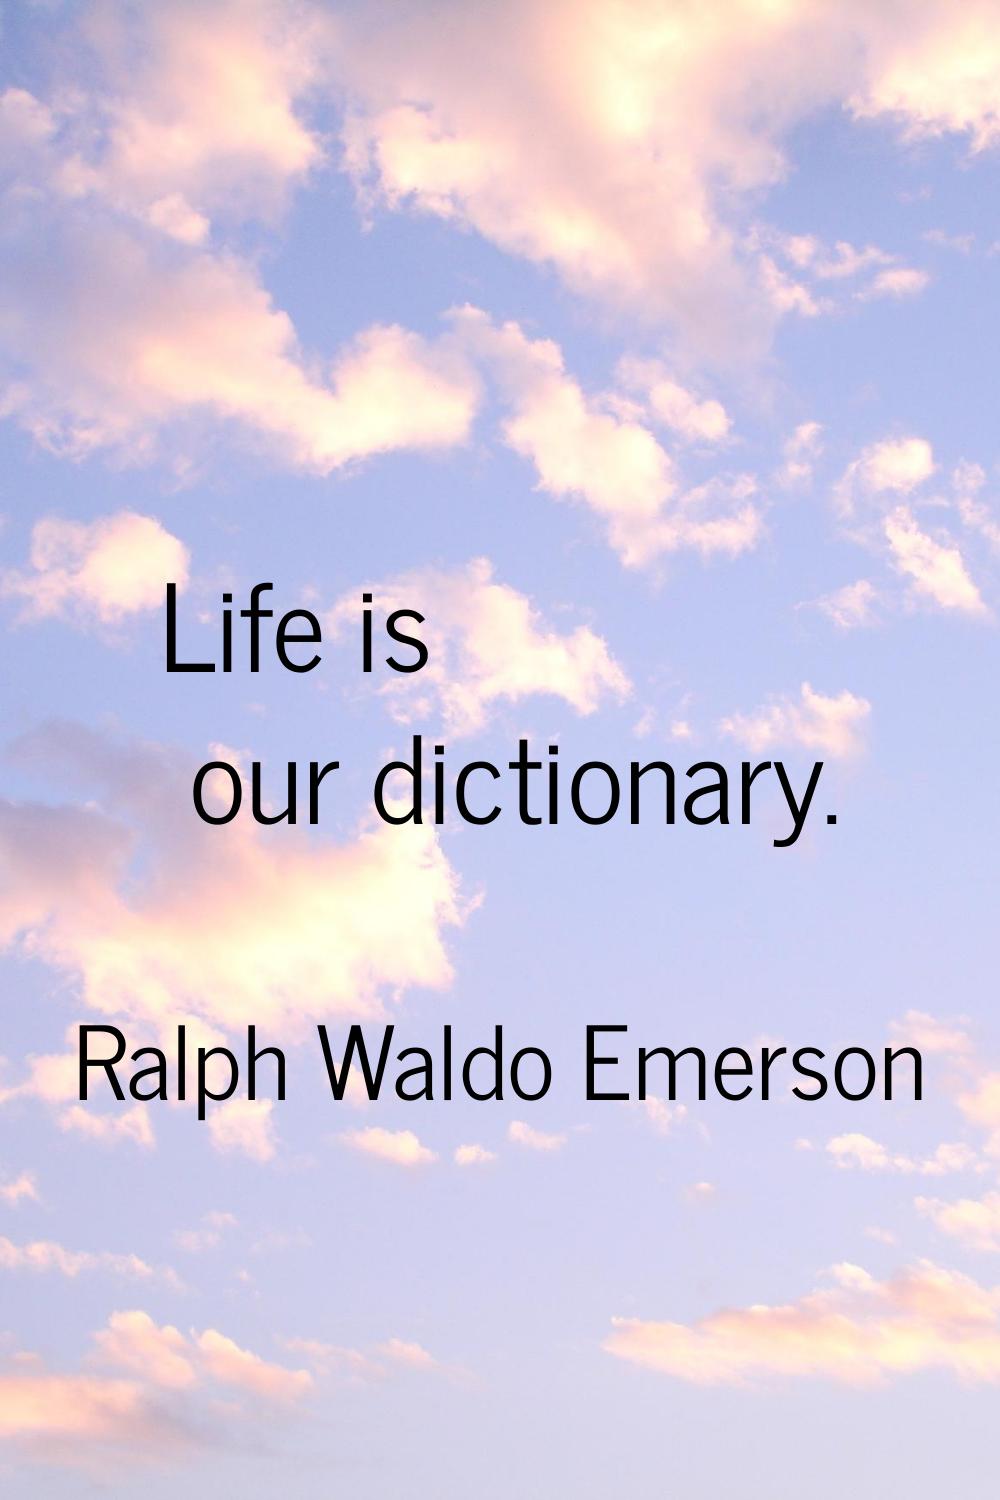 Life is our dictionary.